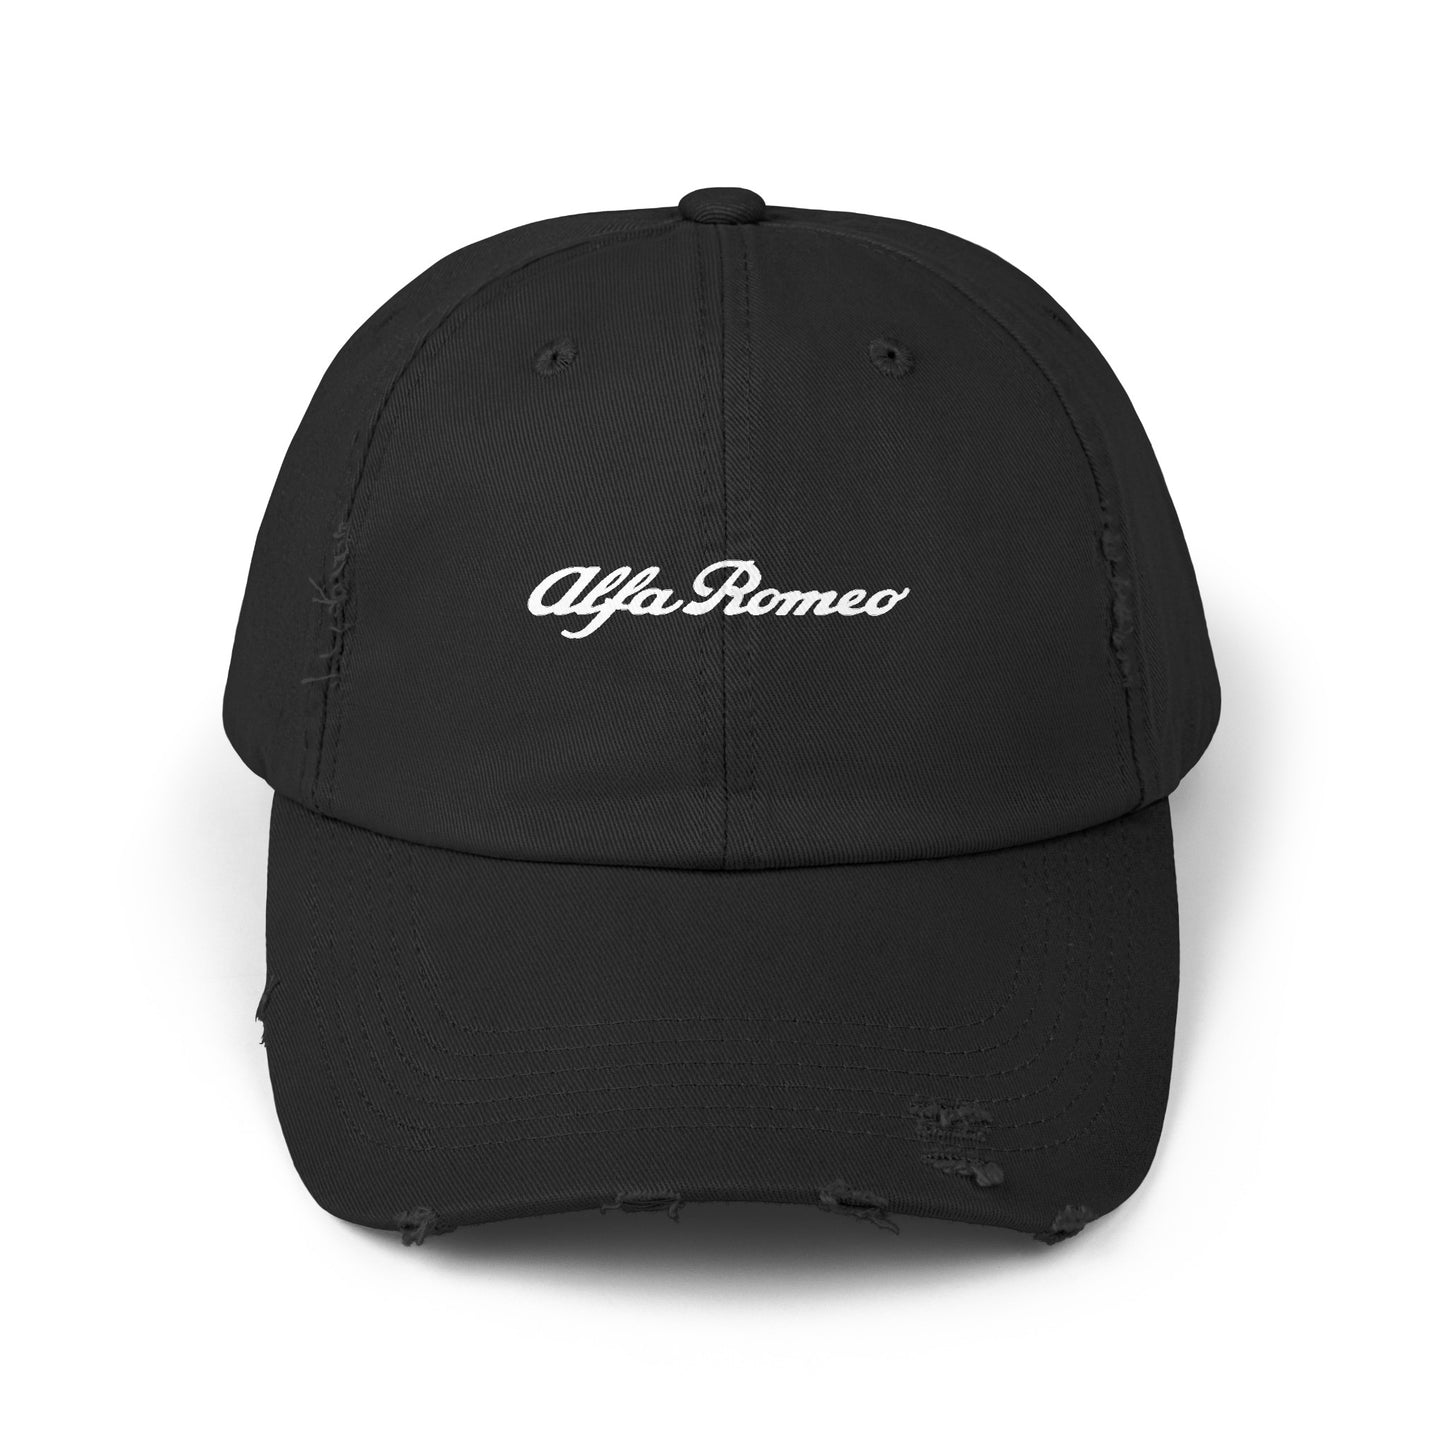 Alfa Romeo Script Logo Distressed Cap - Unisex 100% Cotton Twill - Adjustable Fit - Stylish and Durable - Perfect for Car Enthusiasts